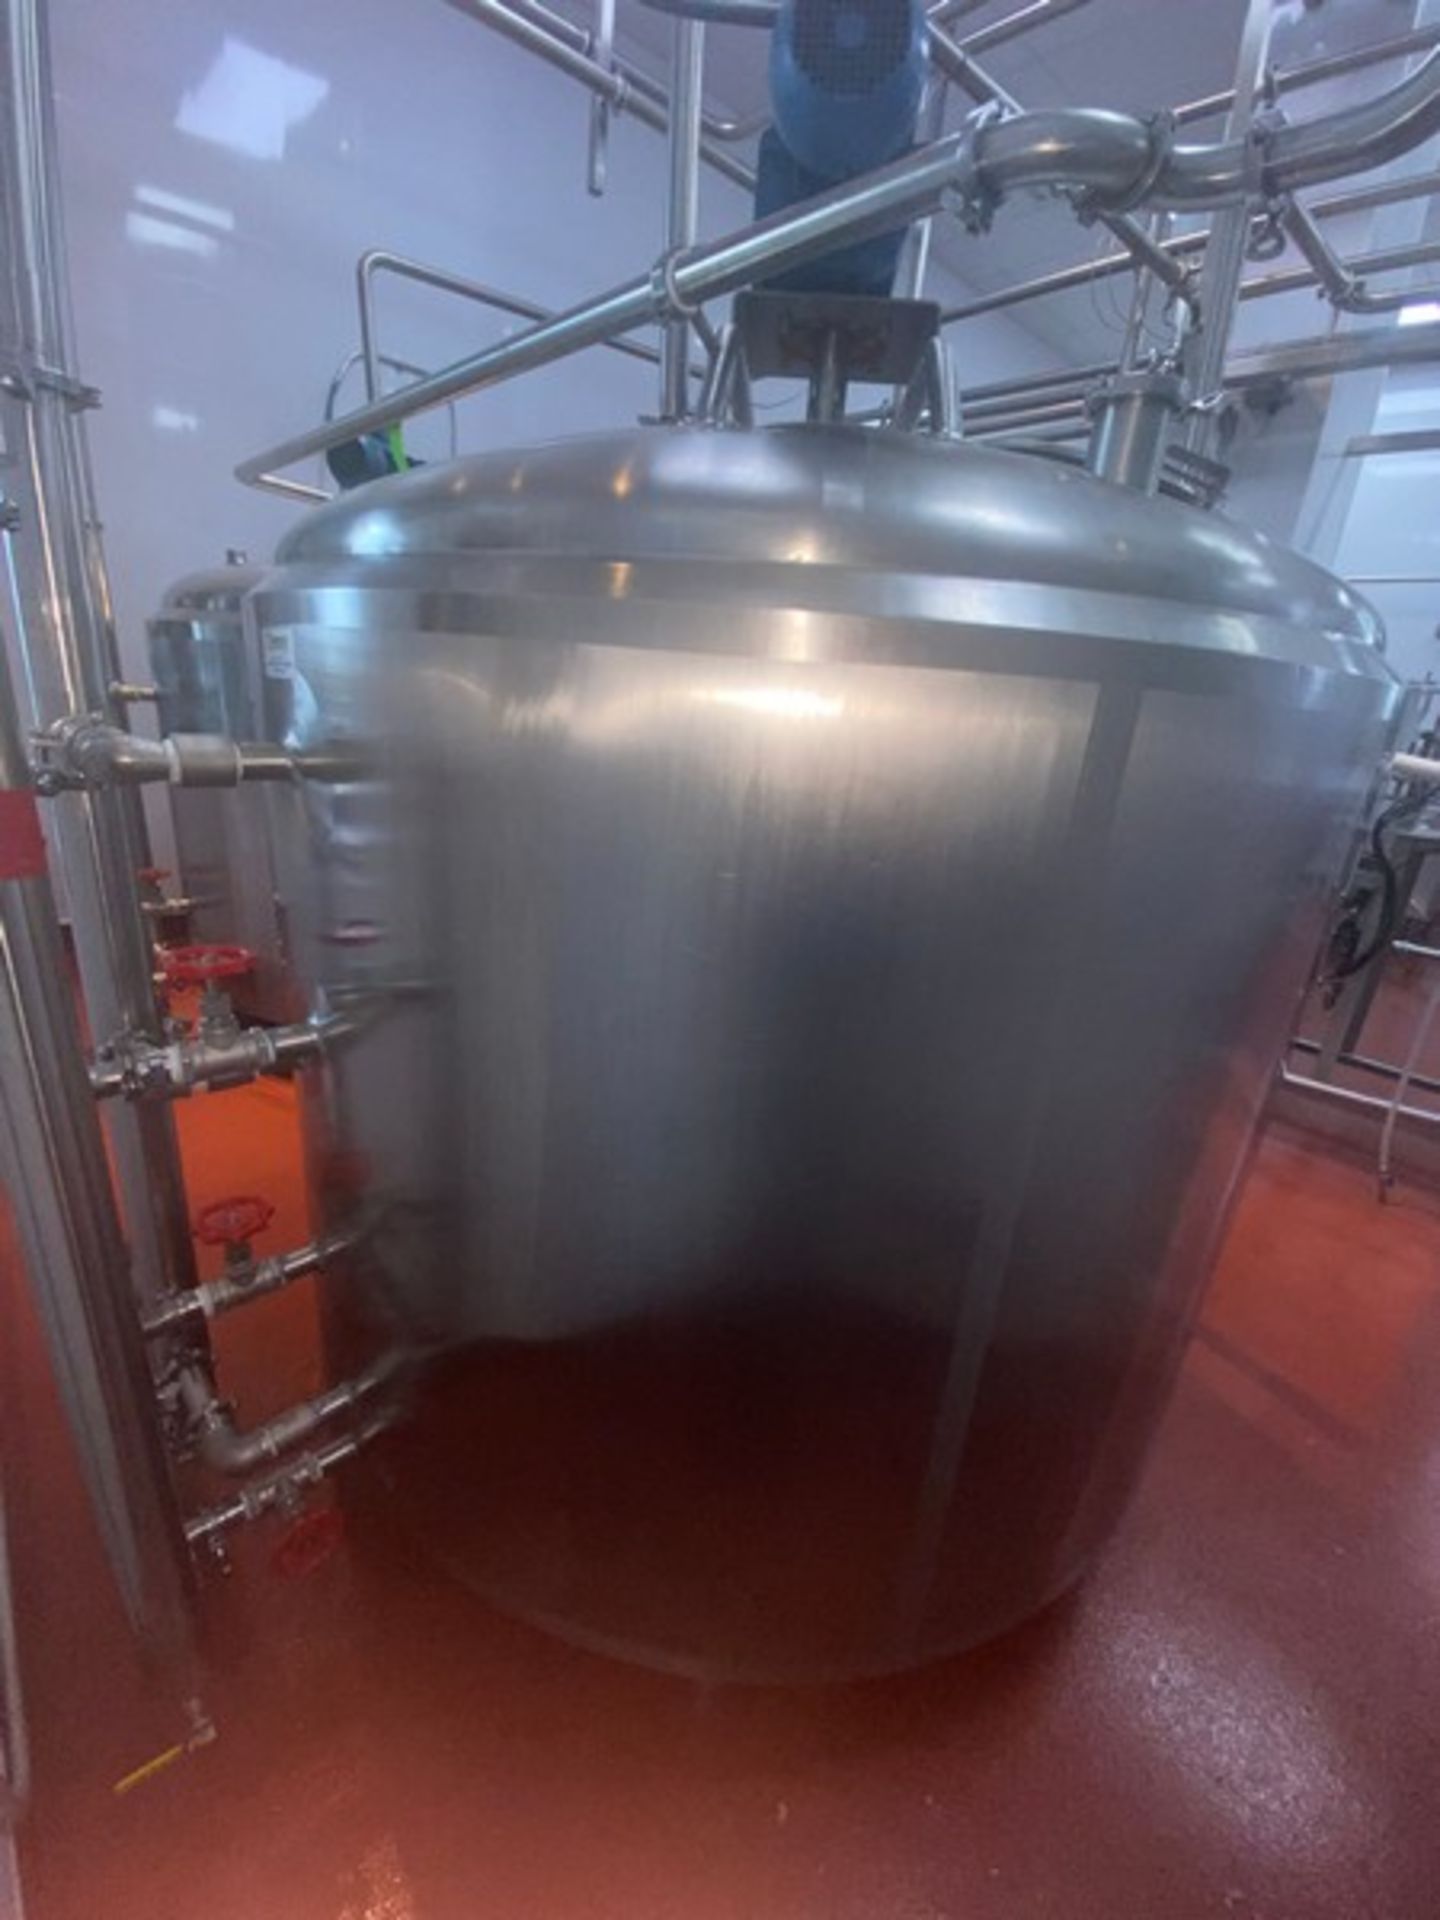 Cherry-Burrell 500 gal. S/S Processor, Fully Jacketed with Sides & Bottom Jacket, with S/S - Image 6 of 15